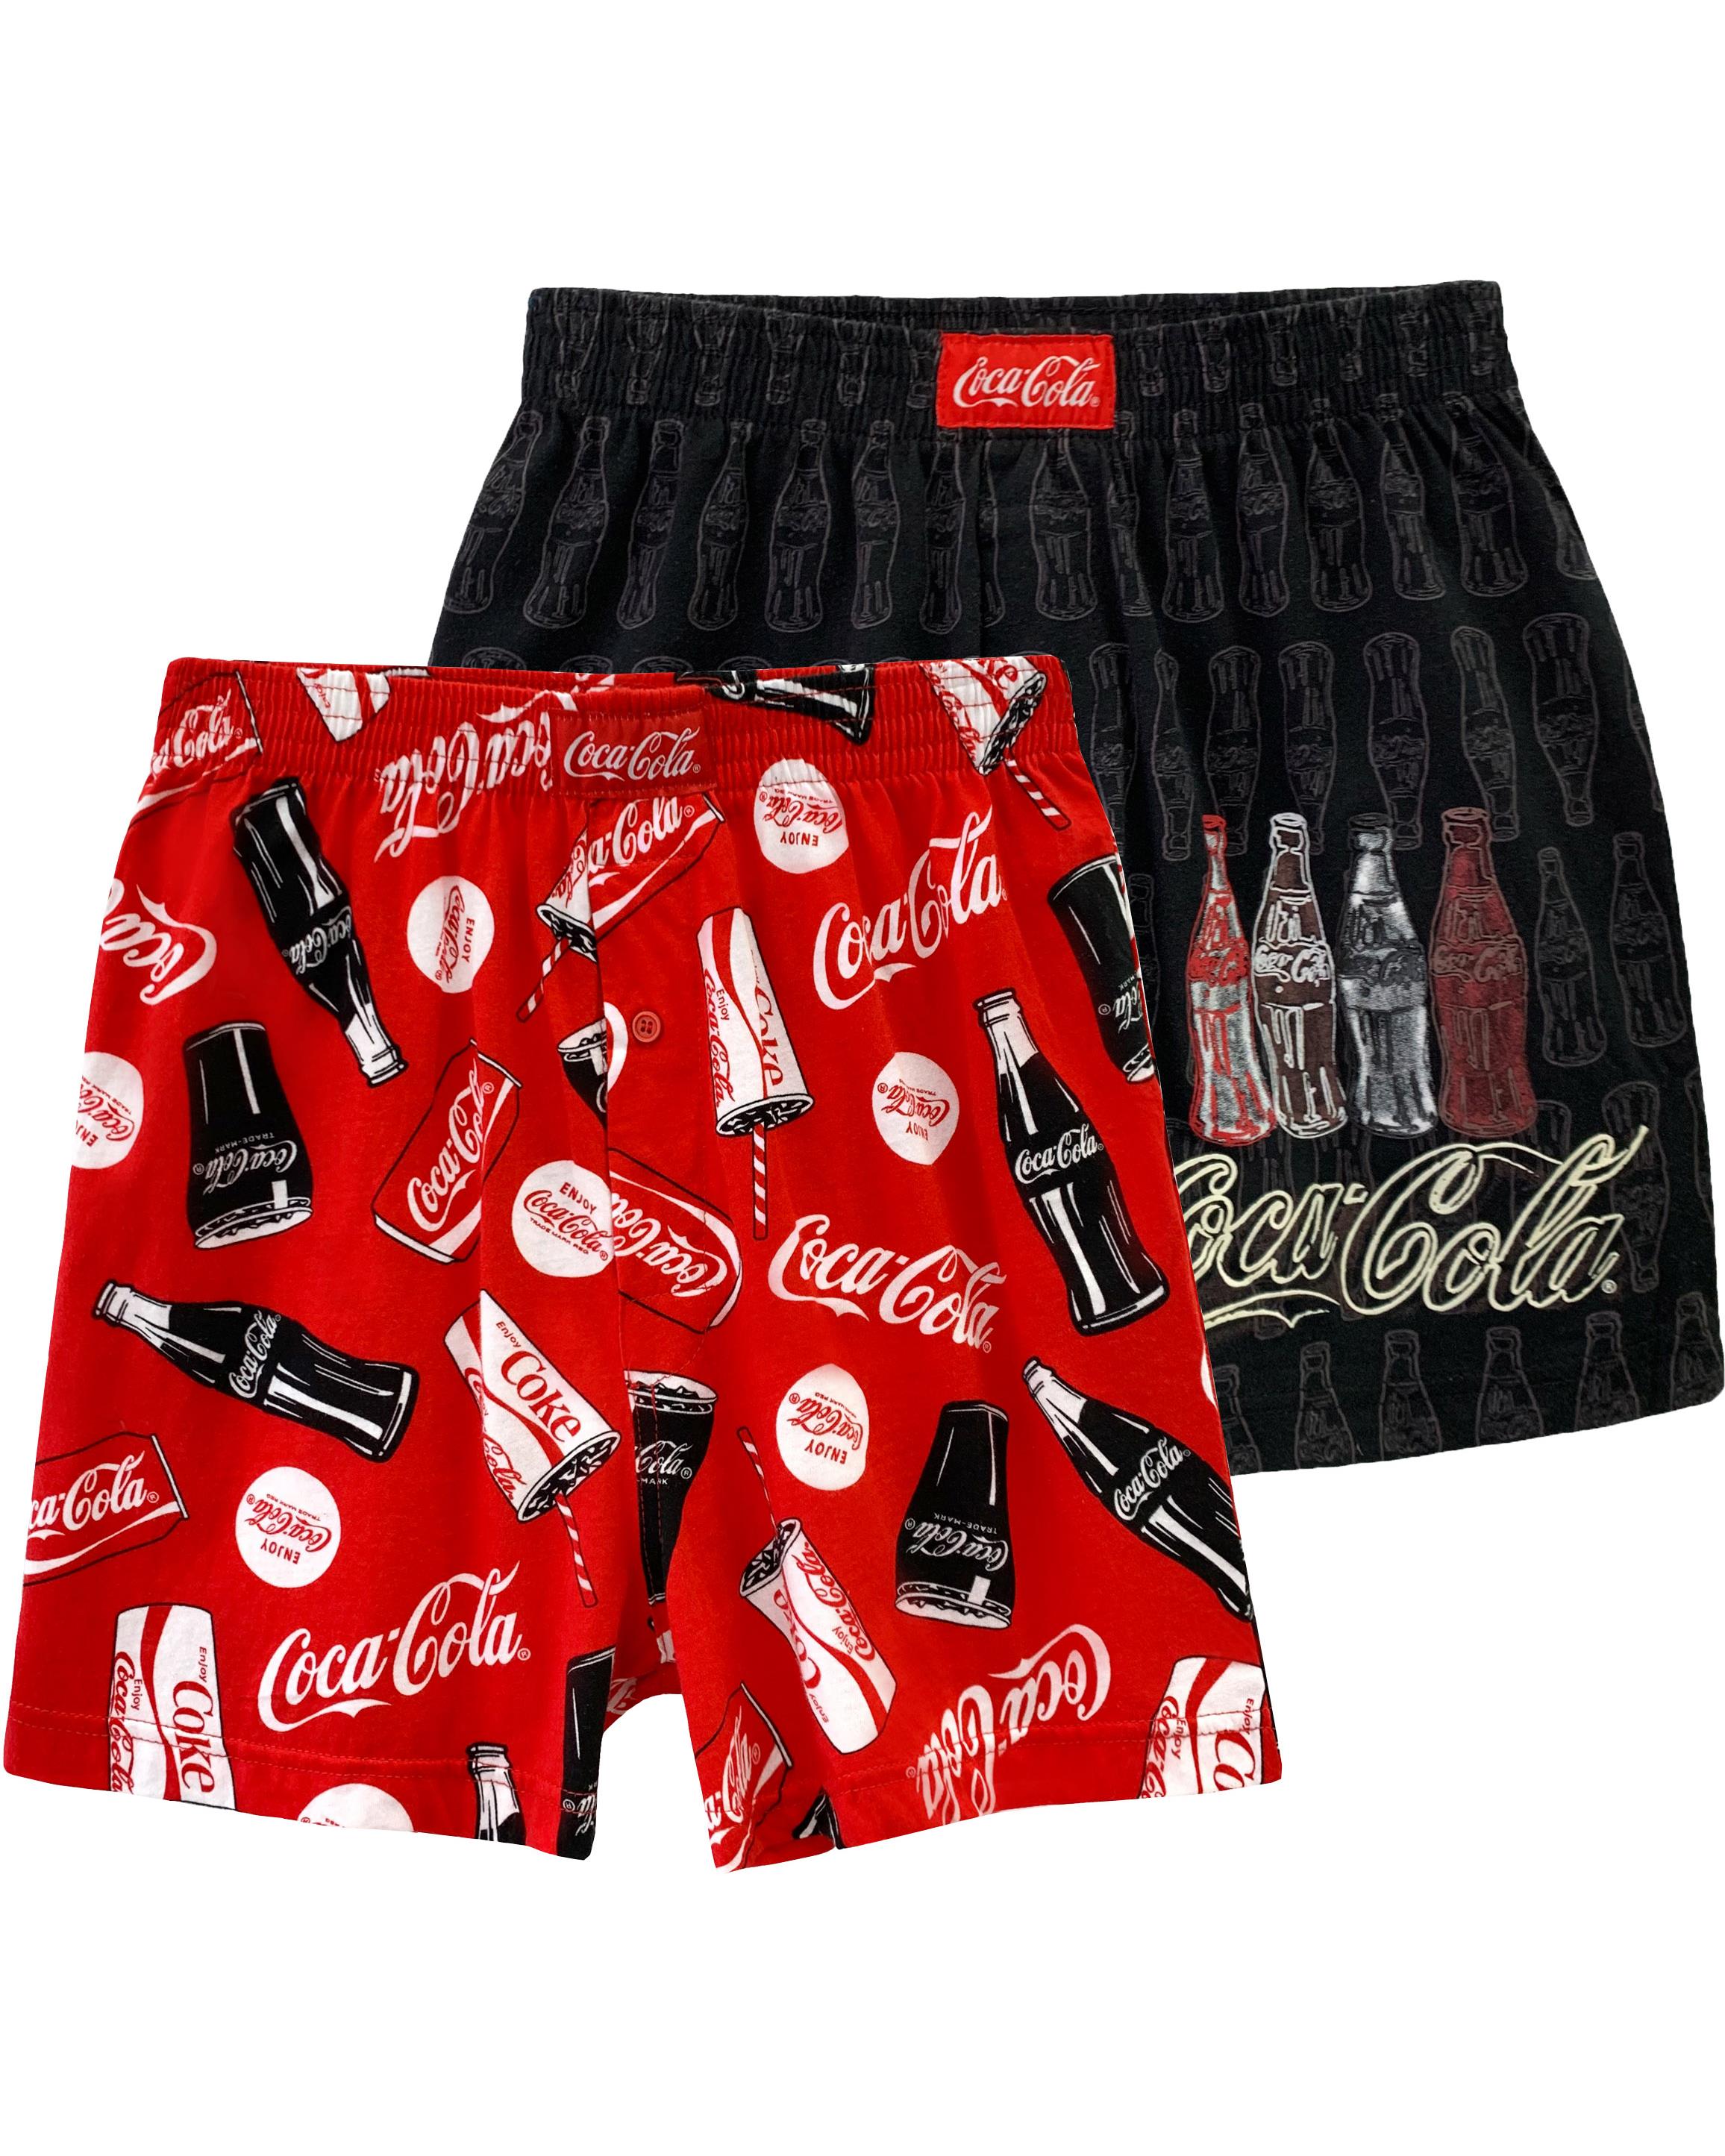 Manchester United F.C Gifts for Boys Teenagers Age 4-14 Years 100/% Cotton Jogger Shorts for School Sports Boys Shorts Official Football Shorts for Children